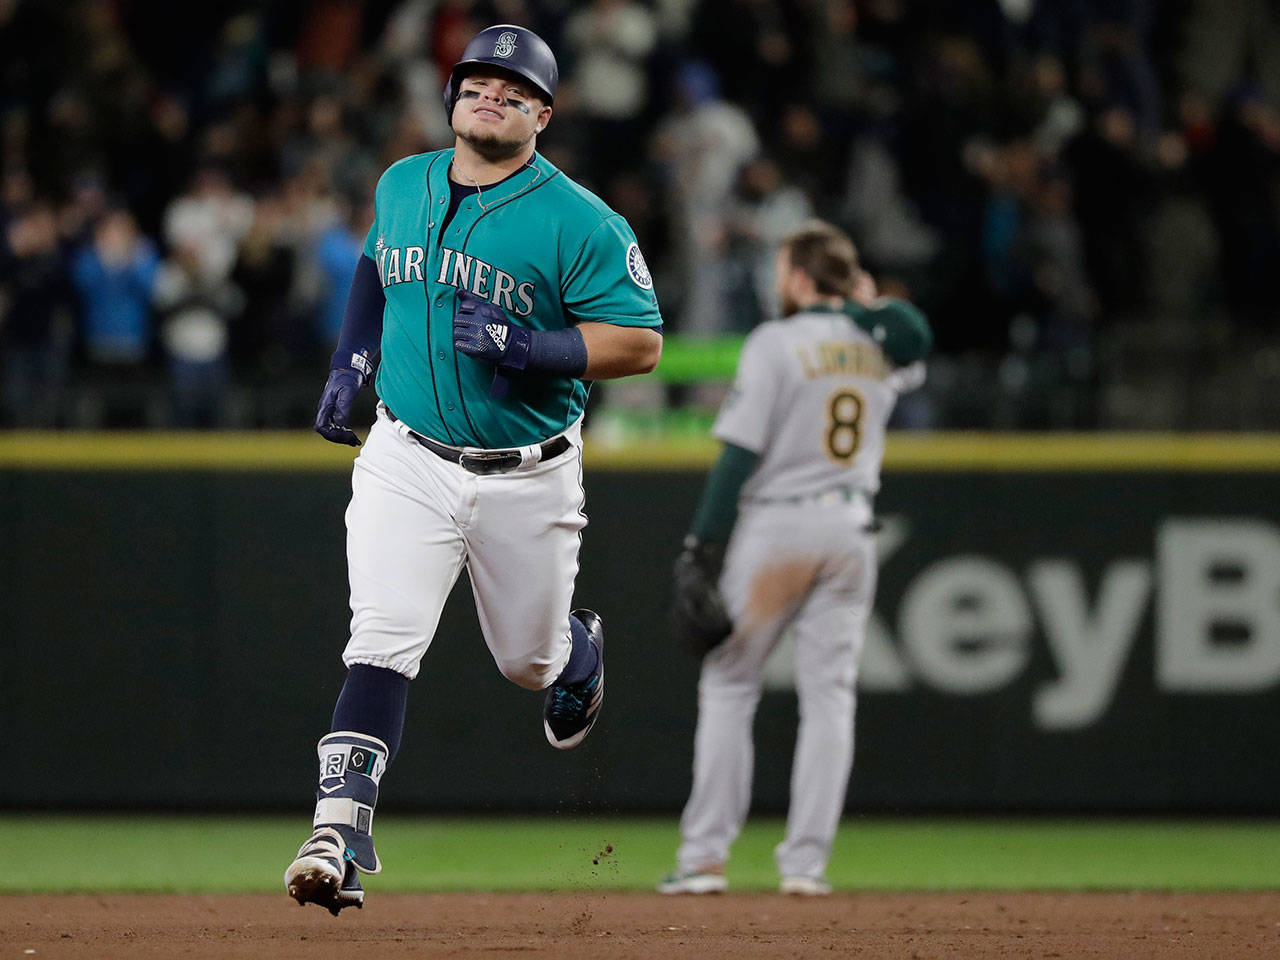 Seattle’s Daniel Vogelbach rounds the bases after hitting a two-run home run Friday at Safeco Field. (Ted S. Warren / Associated Press)